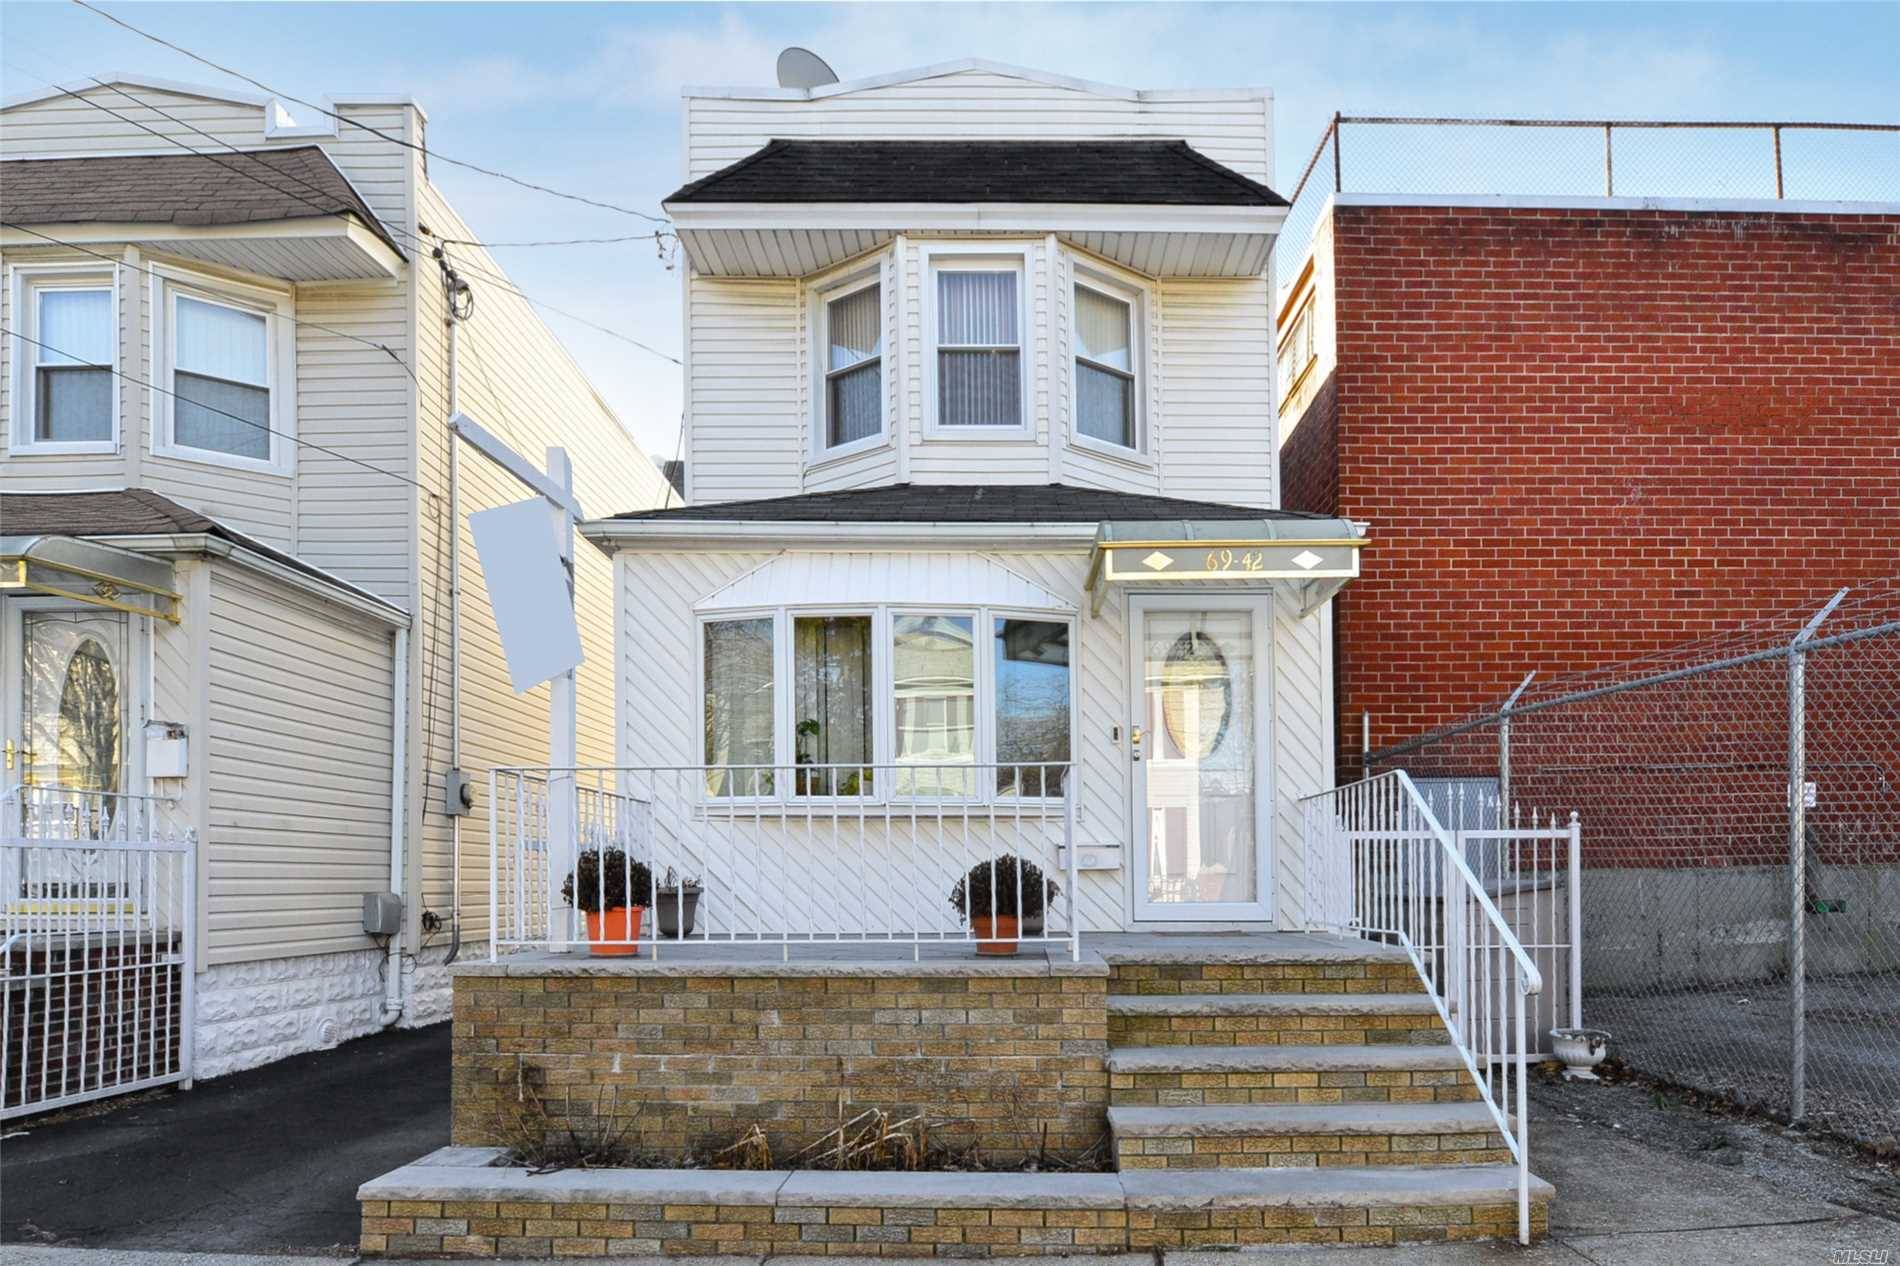 Sunny And Well Kept Detached Colonial On A Quiet And Private Cul De Sac Street.